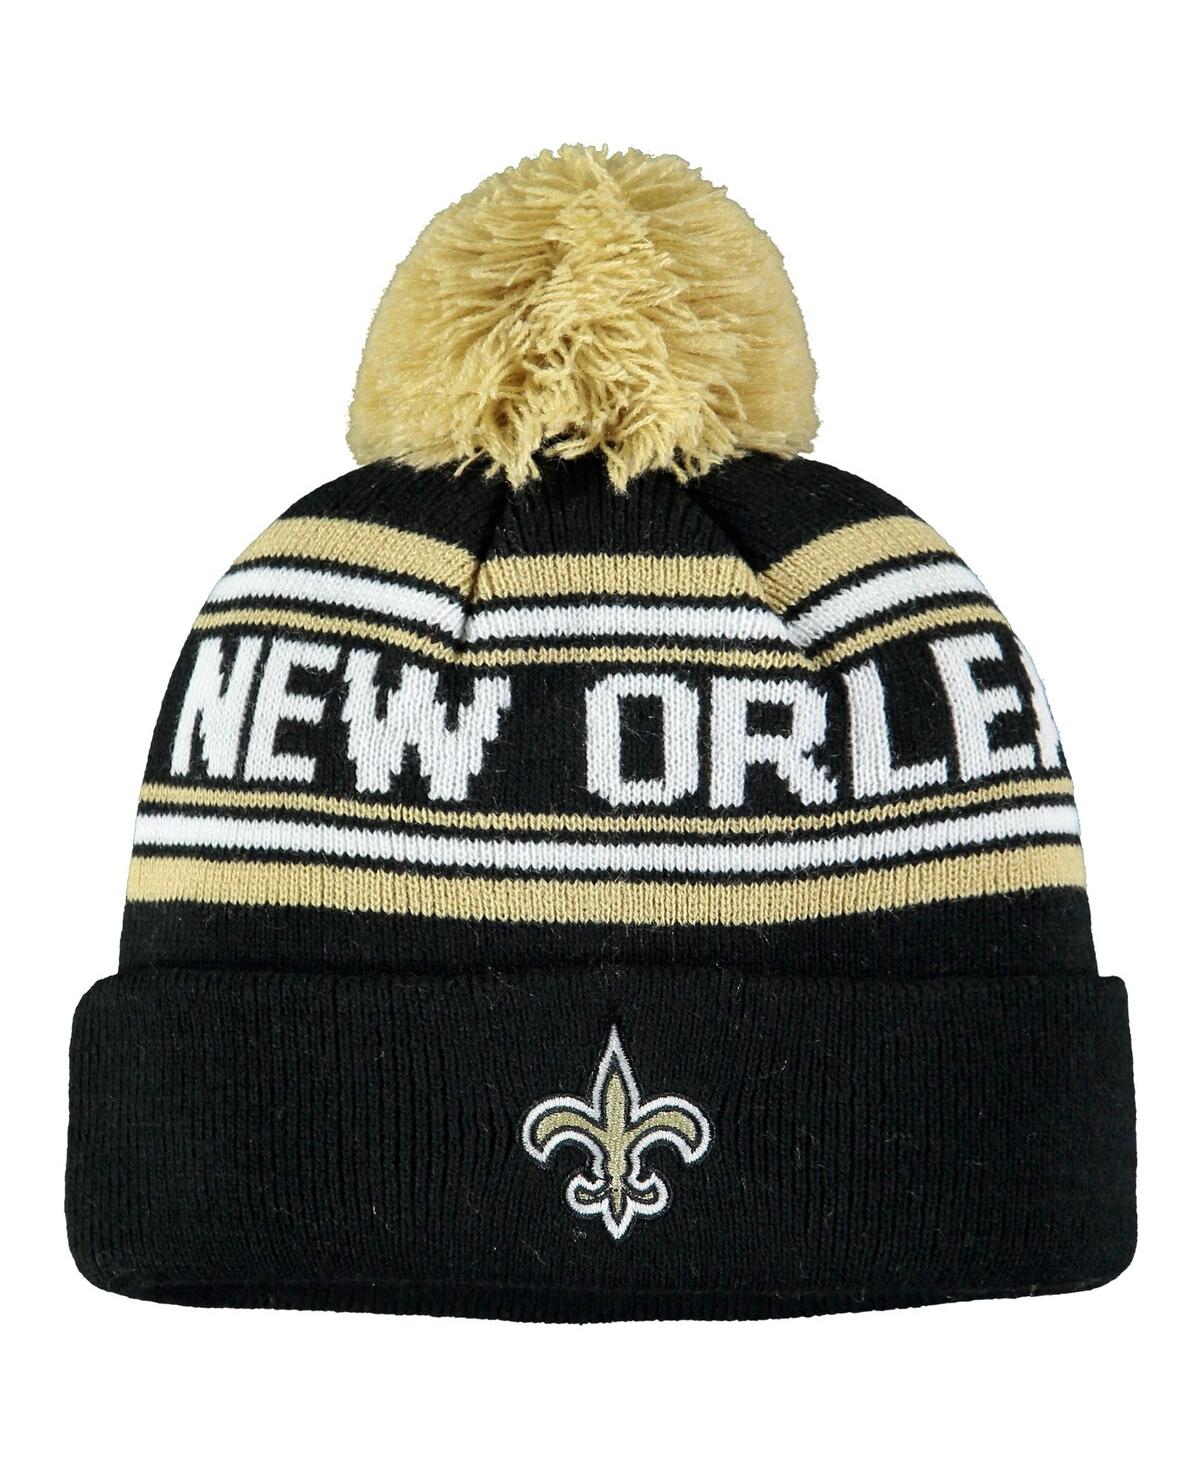 Outerstuff Babies' Little Boys And Girls Black New Orleans Saints Jacquard Cuffed Knit Hat With Pom